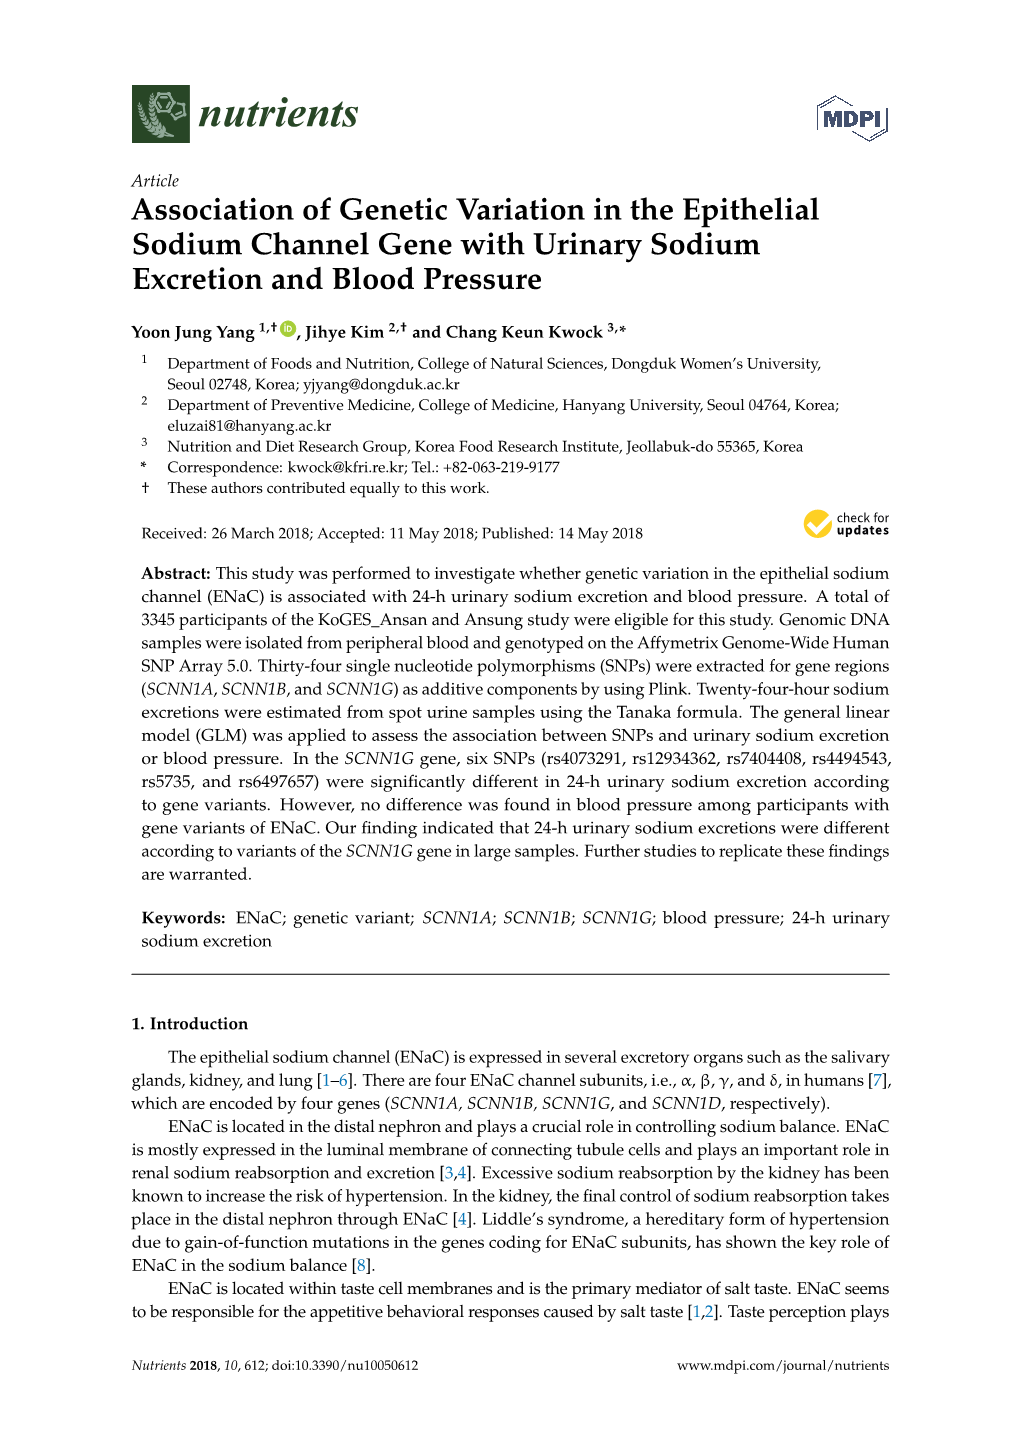 Association of Genetic Variation in the Epithelial Sodium Channel Gene with Urinary Sodium Excretion and Blood Pressure